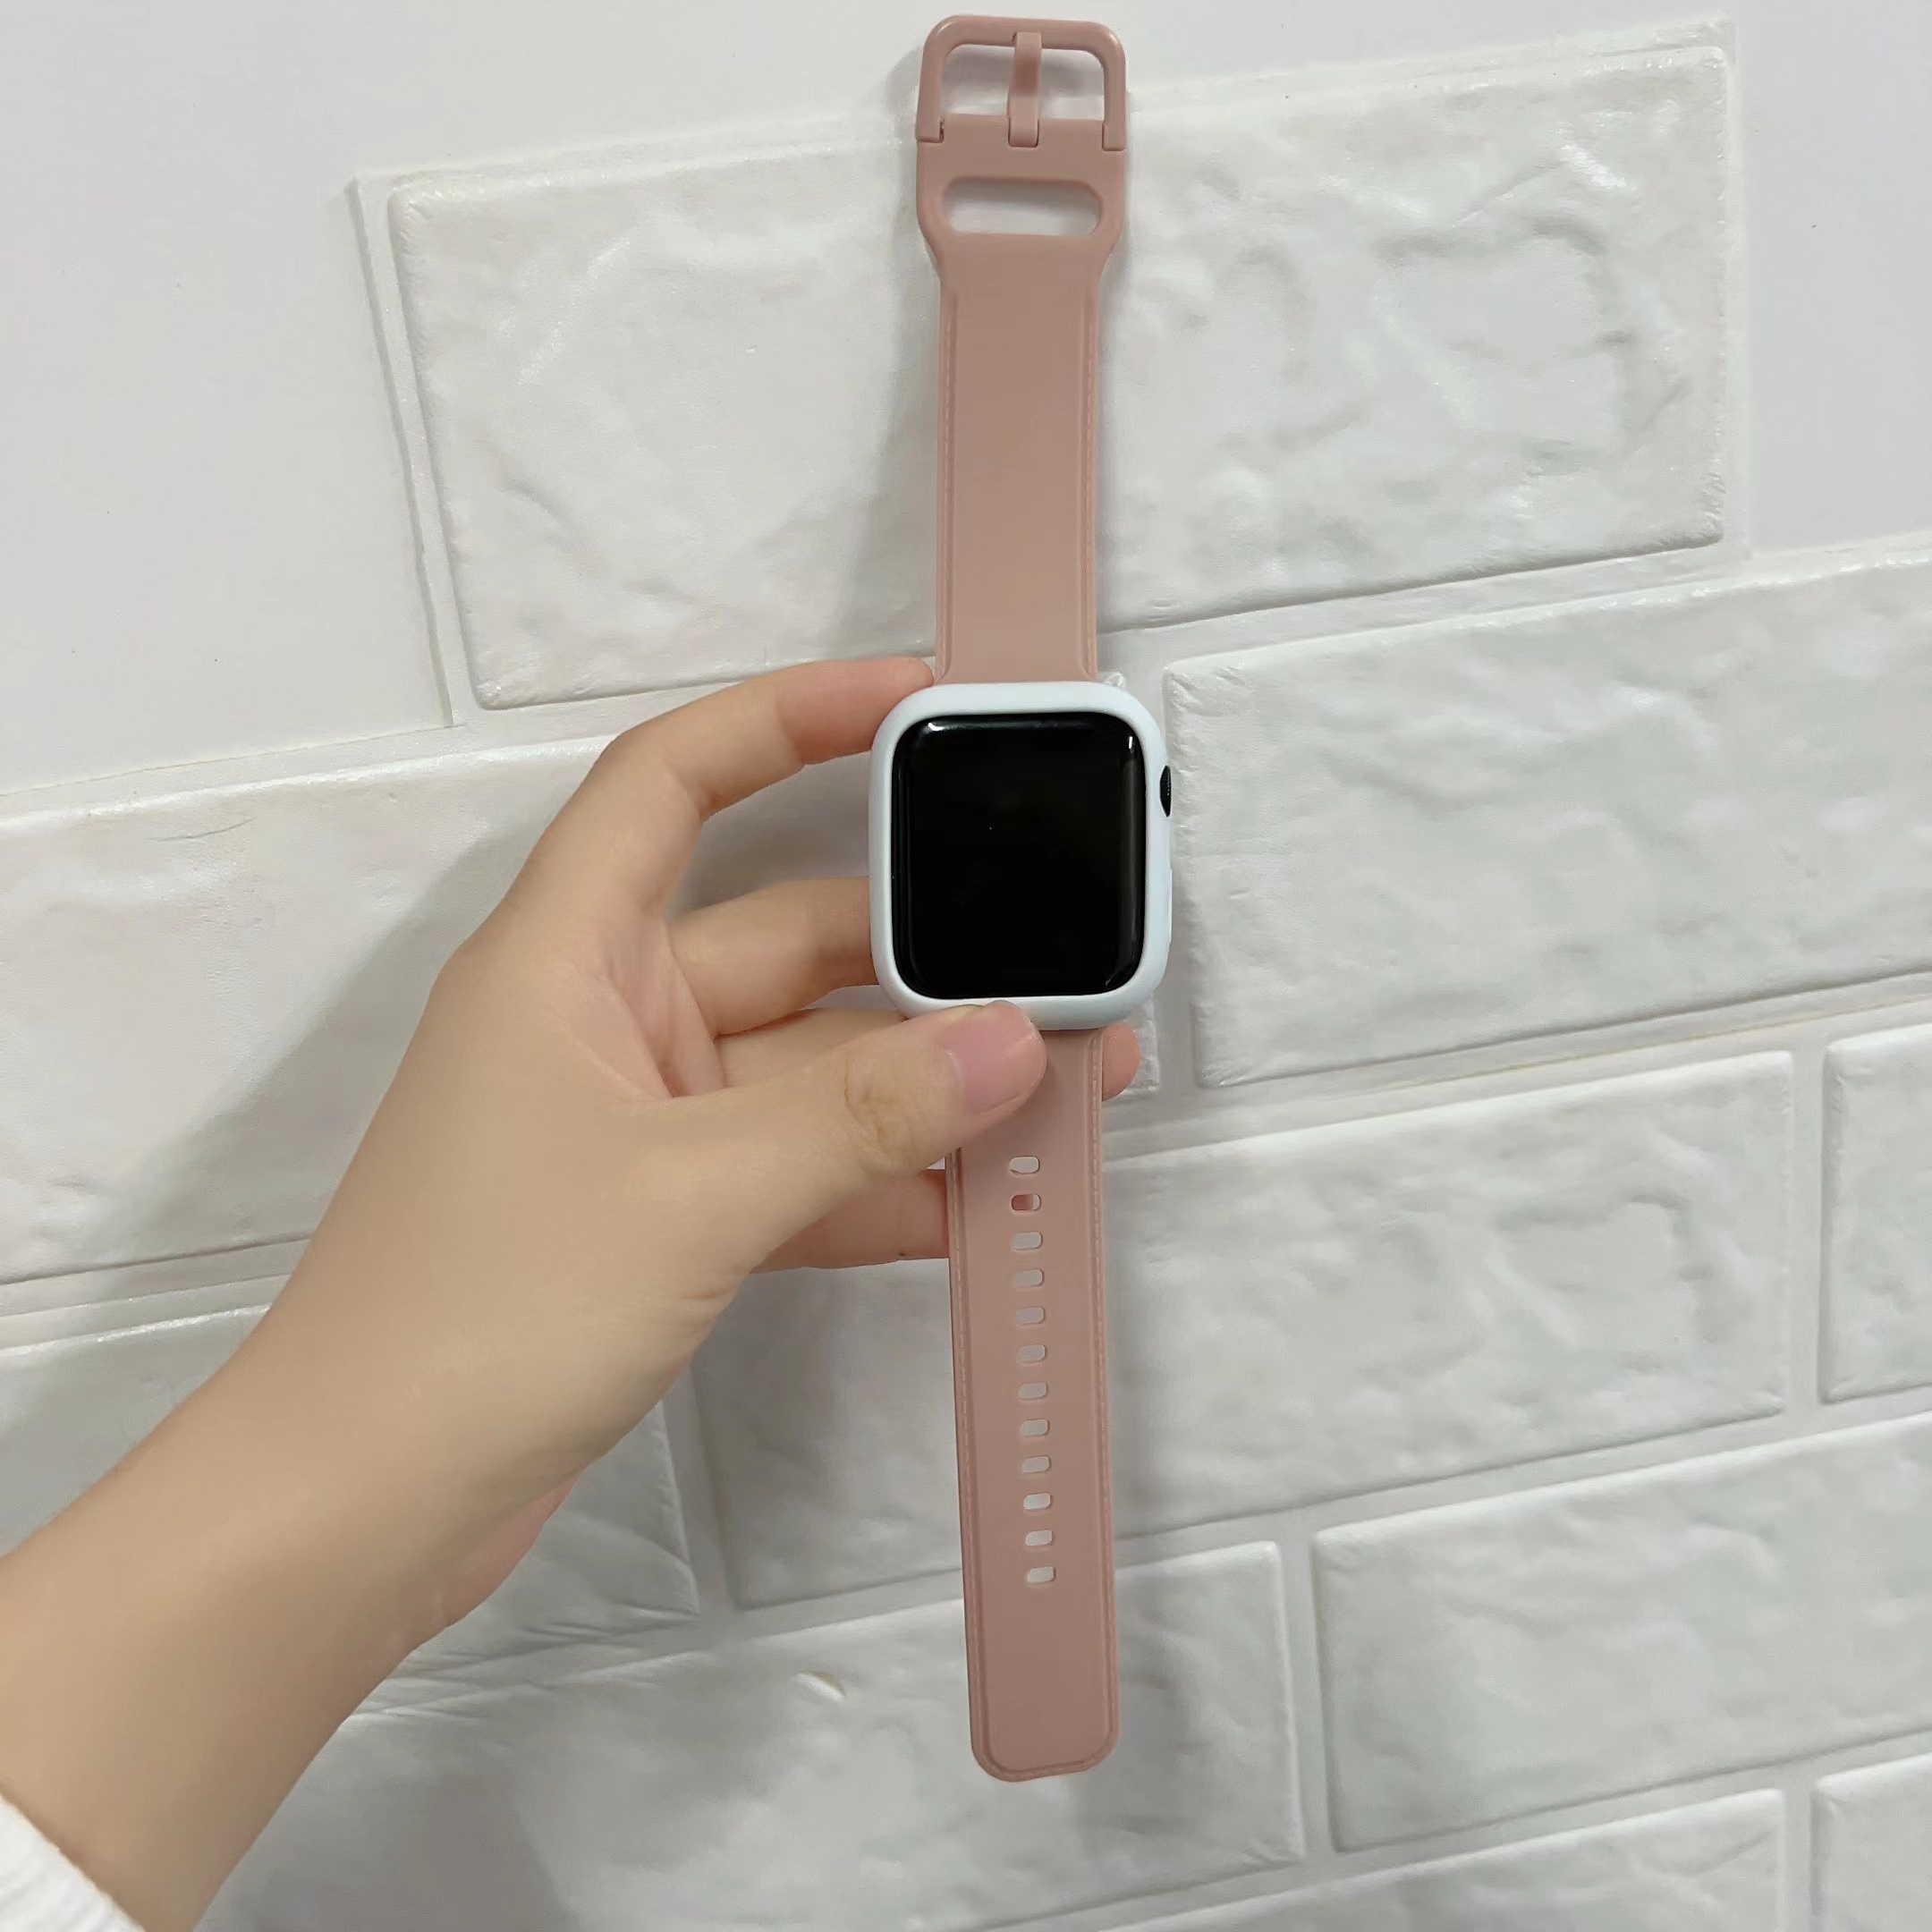 Sand Pink Bumper Case For Apple Watch